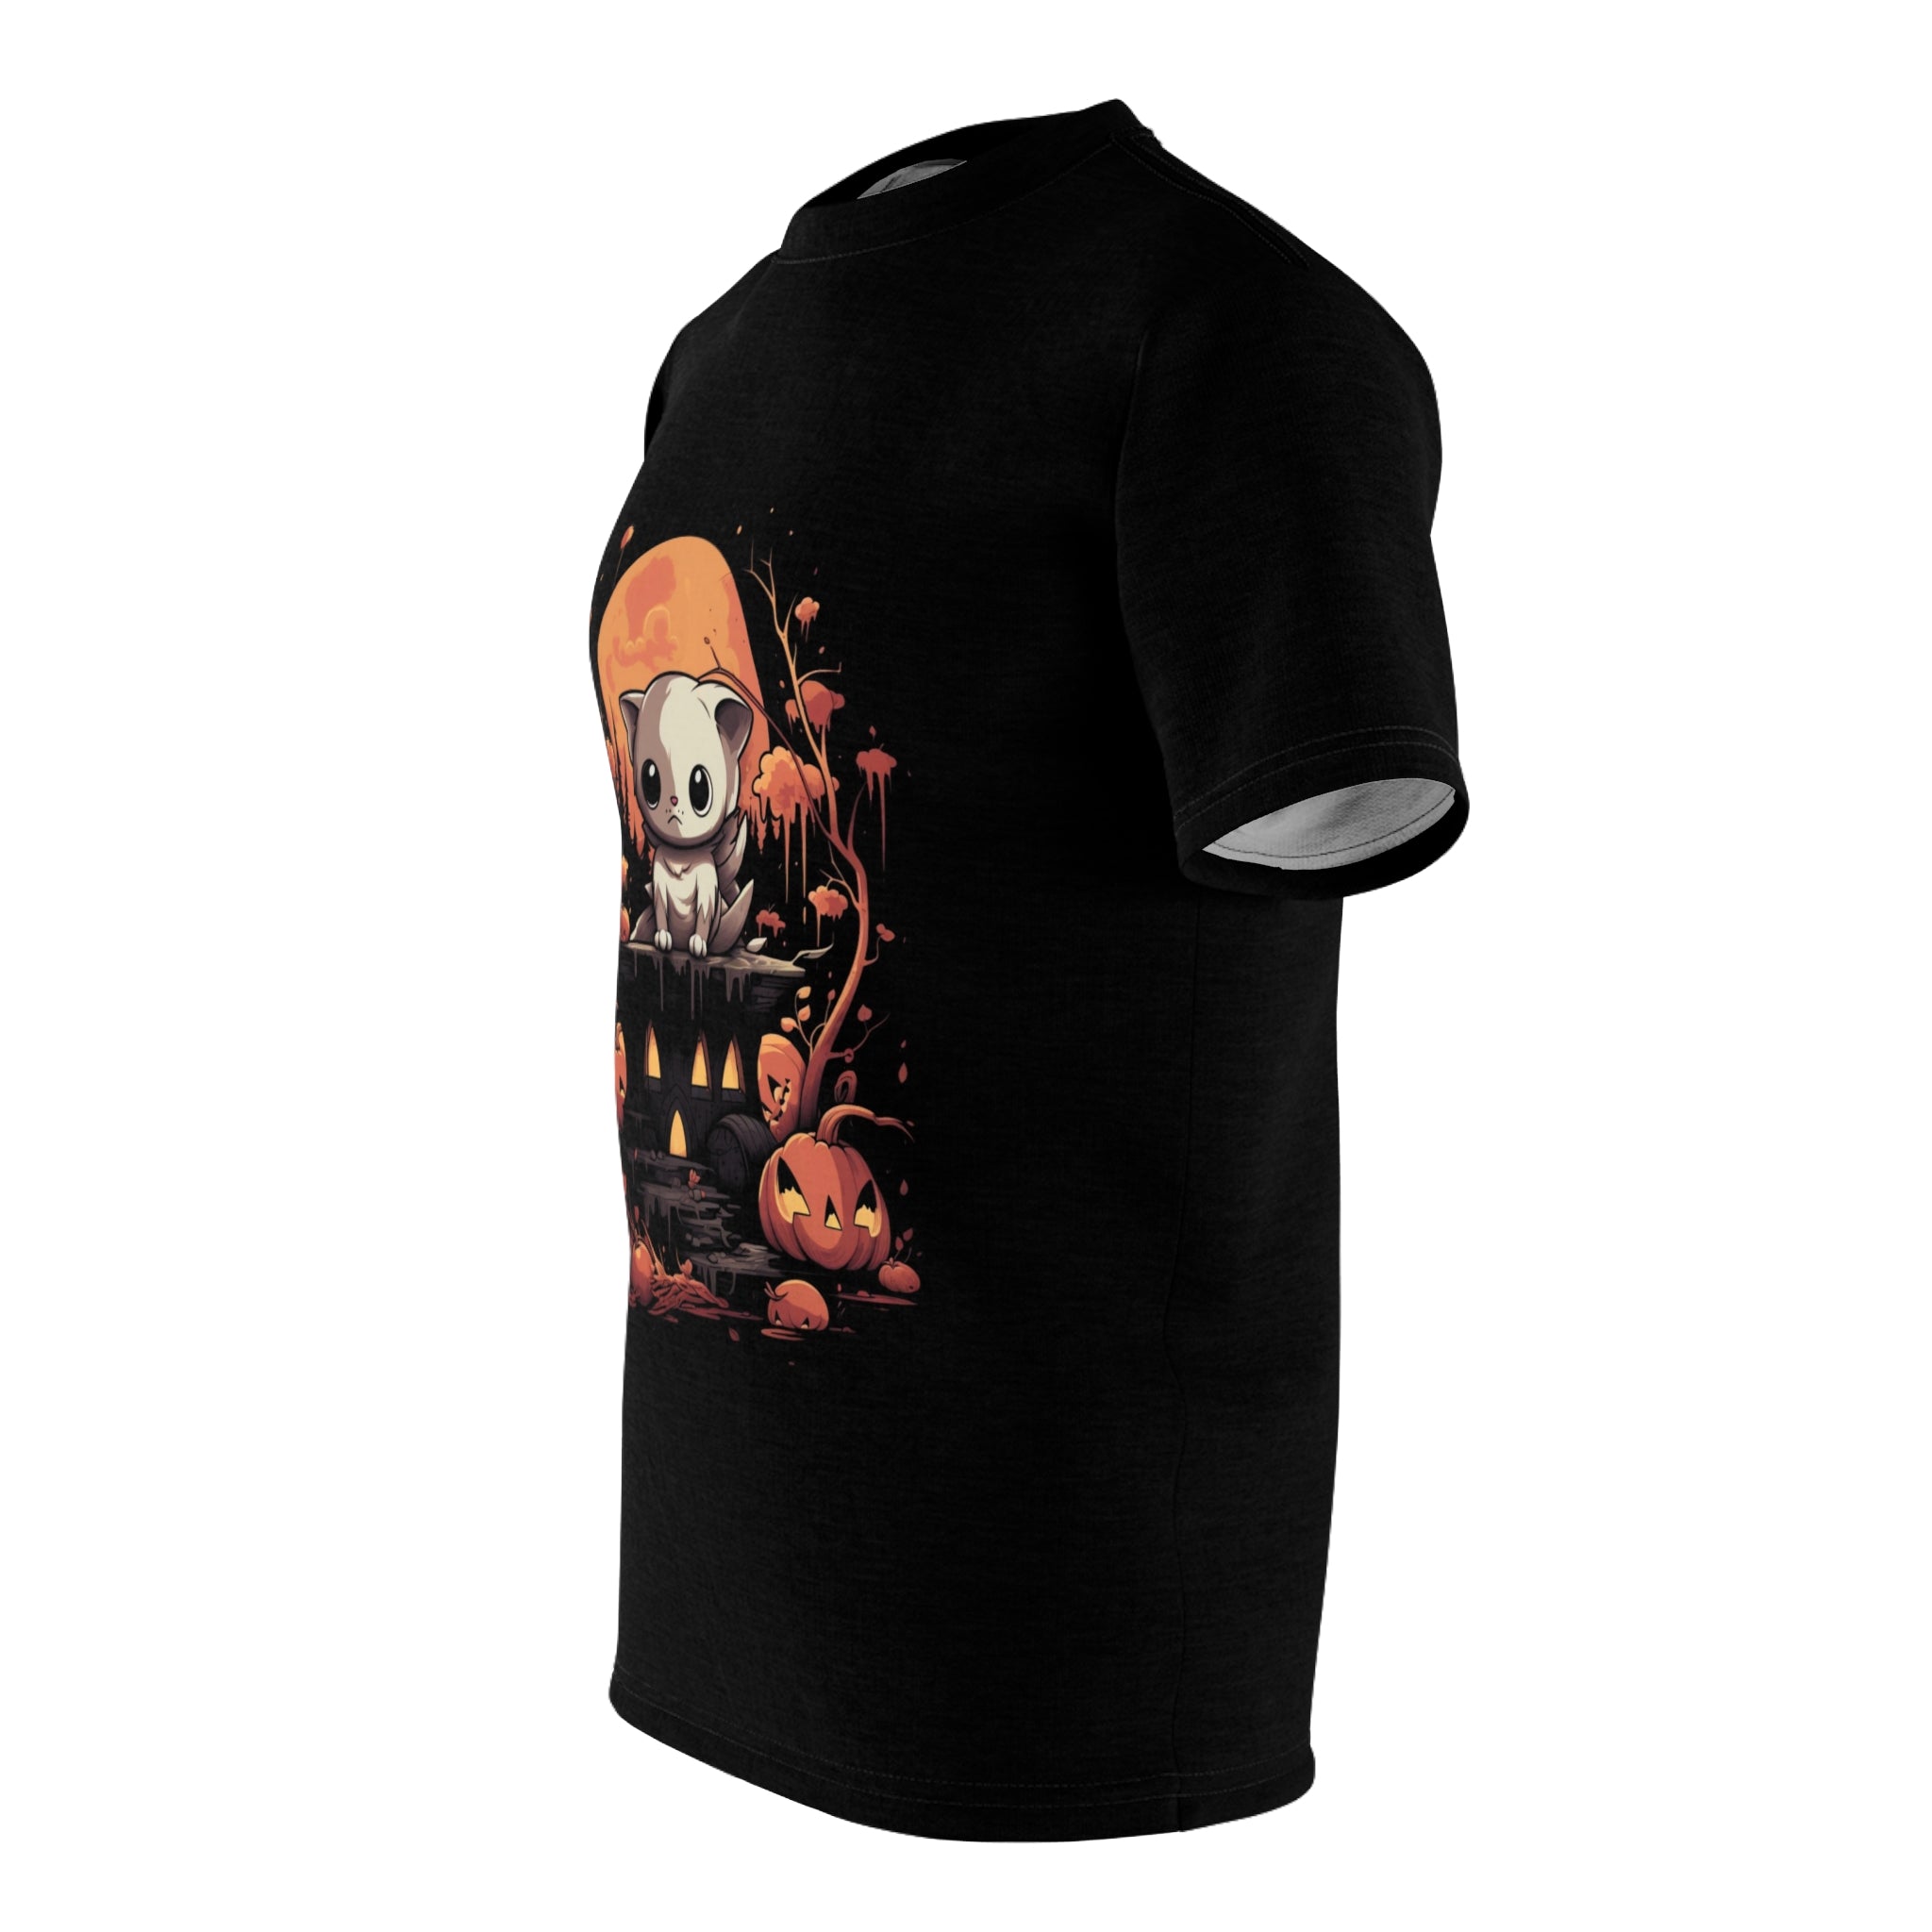 Nobody Came to the Party | Halloween T-Shirt | Horror Apparel | Cute Spooky Cat | Unisex Cut & Sew Tee (AOP)